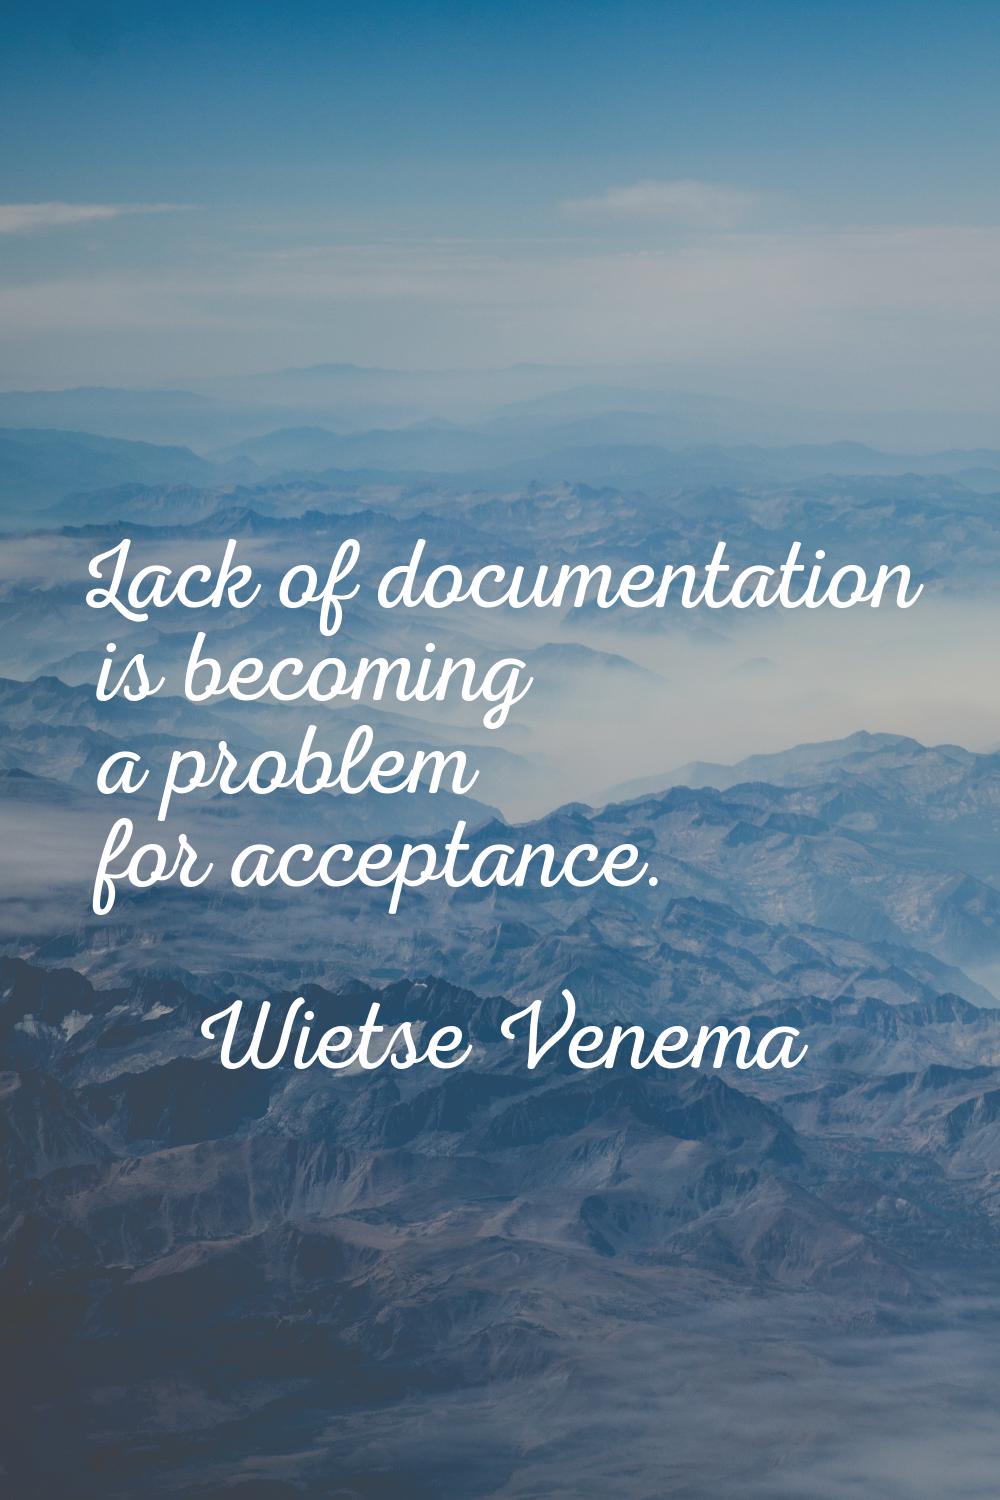 Lack of documentation is becoming a problem for acceptance.